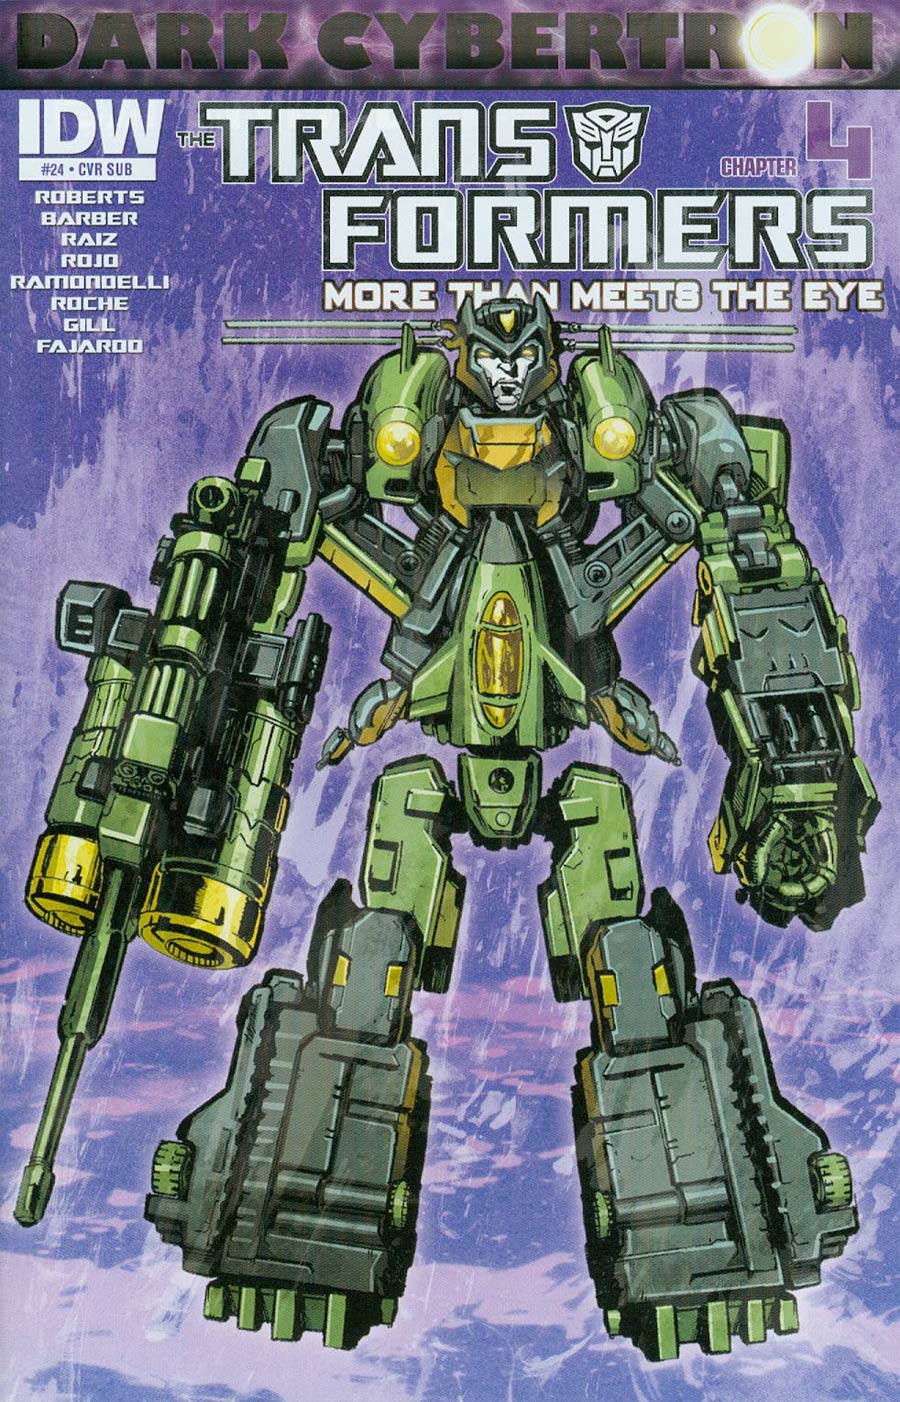 Transformers More Than Meets The Eye #24 Cover B Variant Phil Jimenez Subscription Cover (Dark Cybertron Part 4)